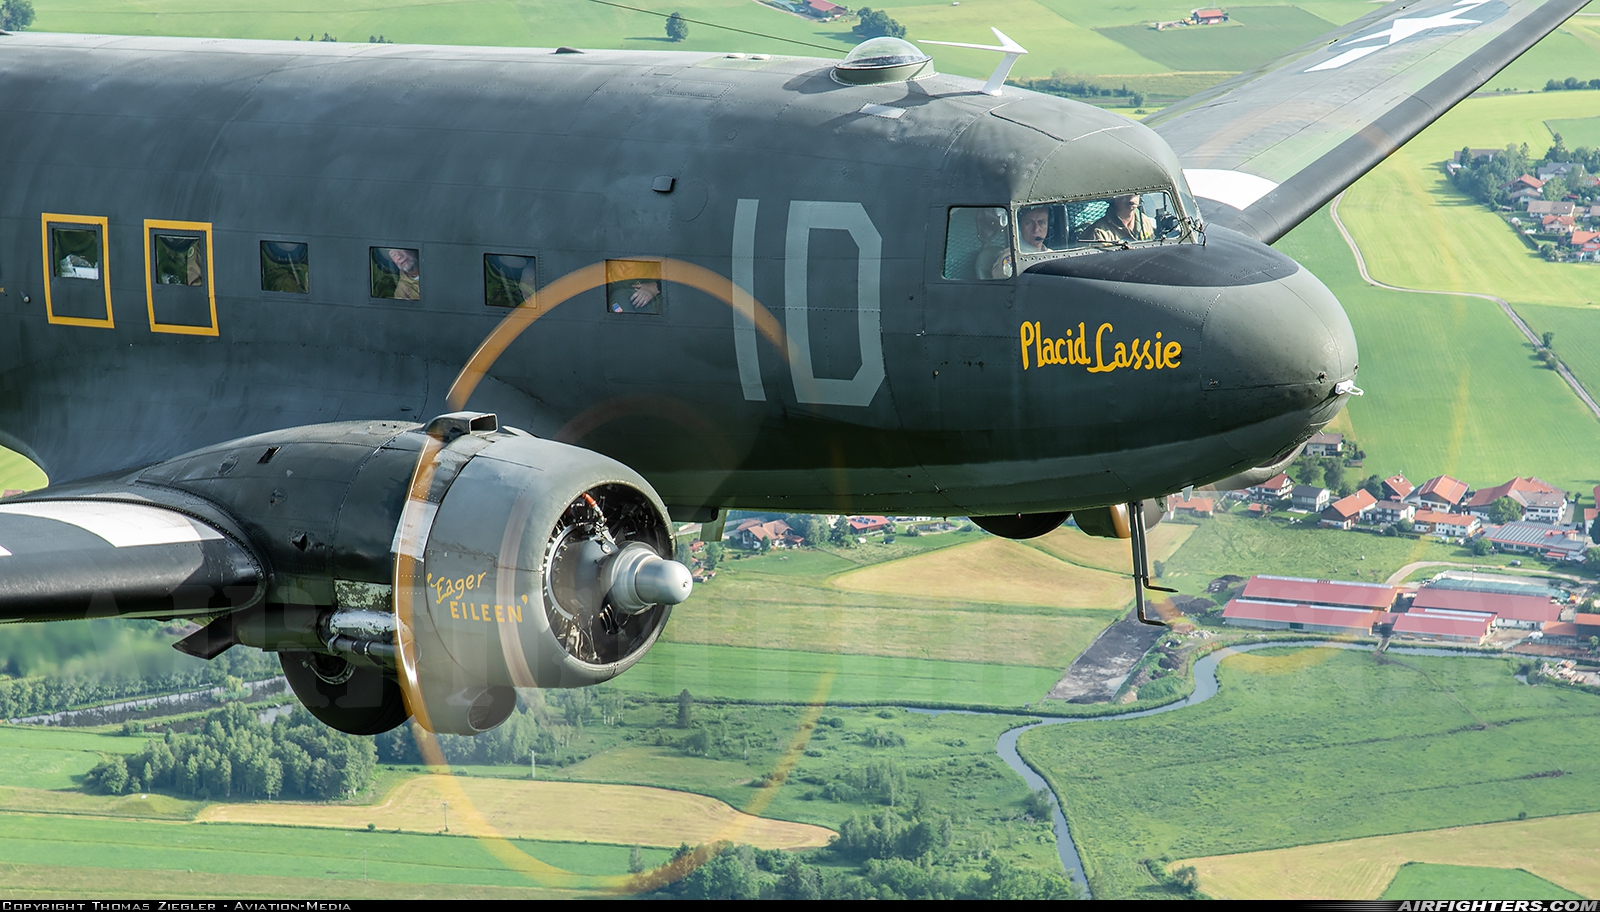 Private - Tunison Foundation Douglas C-47A Skytrain N74589 at In Flight, Germany